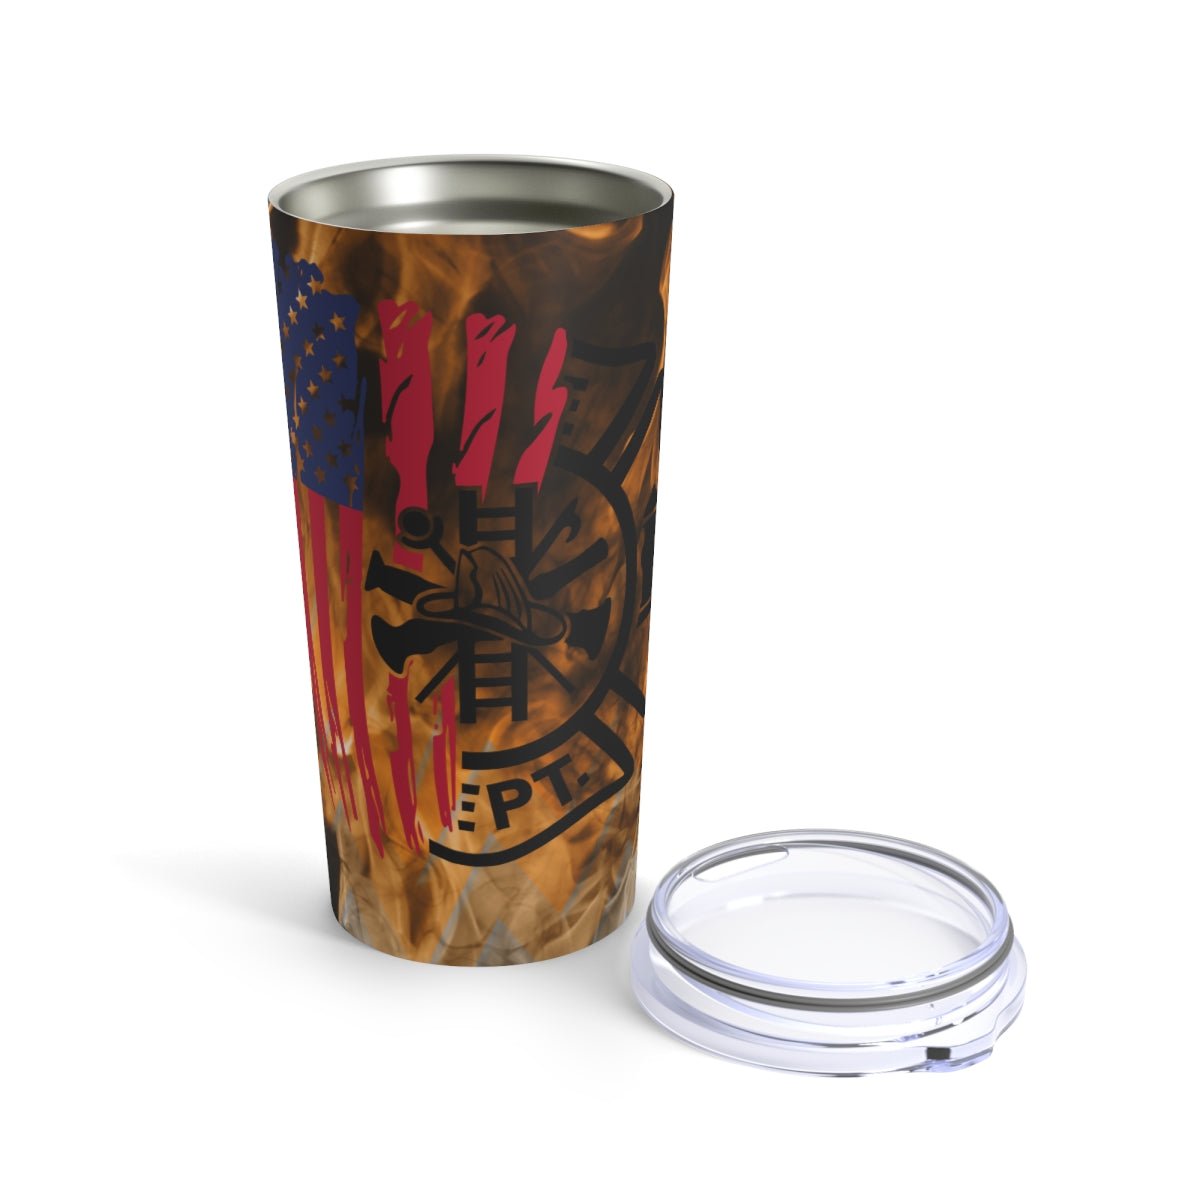 Distressed Fire Department Tumbler 20oz - Salty Medic Clothing Co.